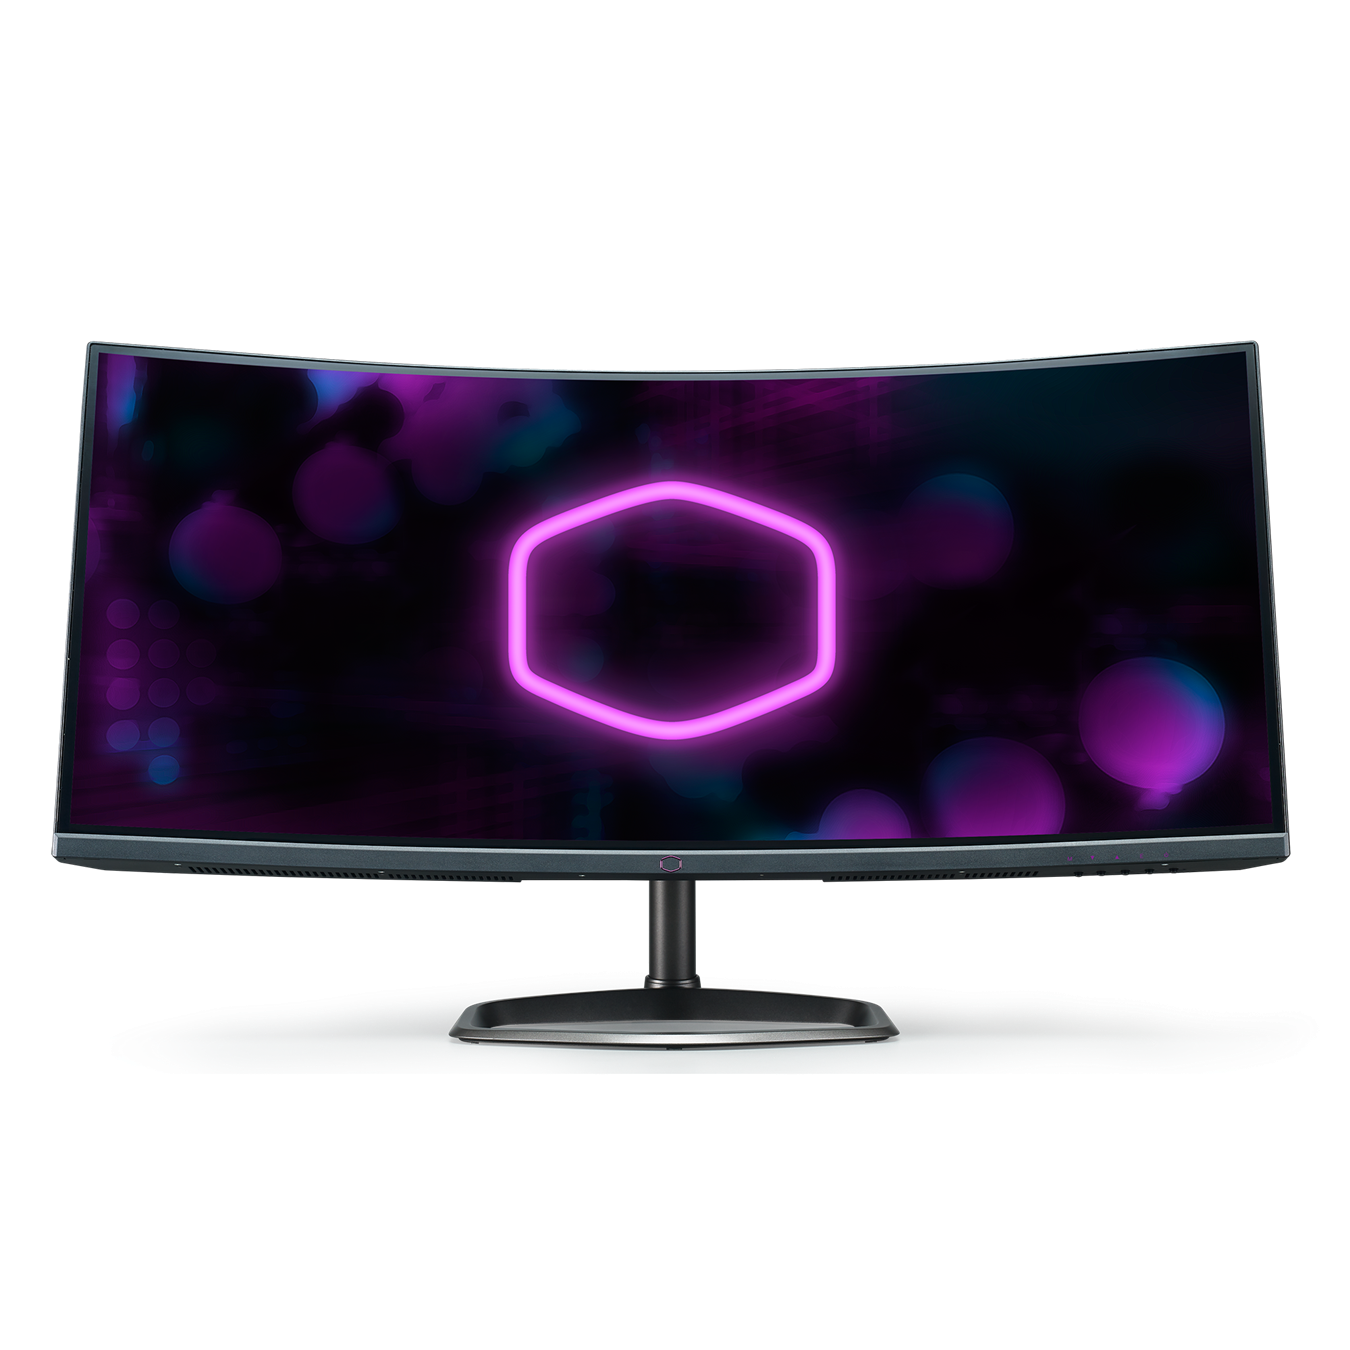 GM34-CW Gaming Monitor - By having the power game mode with up to 165Hz ultra high refresh rate, 1ms response time and DisplayHDR 400 support, you are given the ultra power to react faster, and spot your enemies in the dark. 